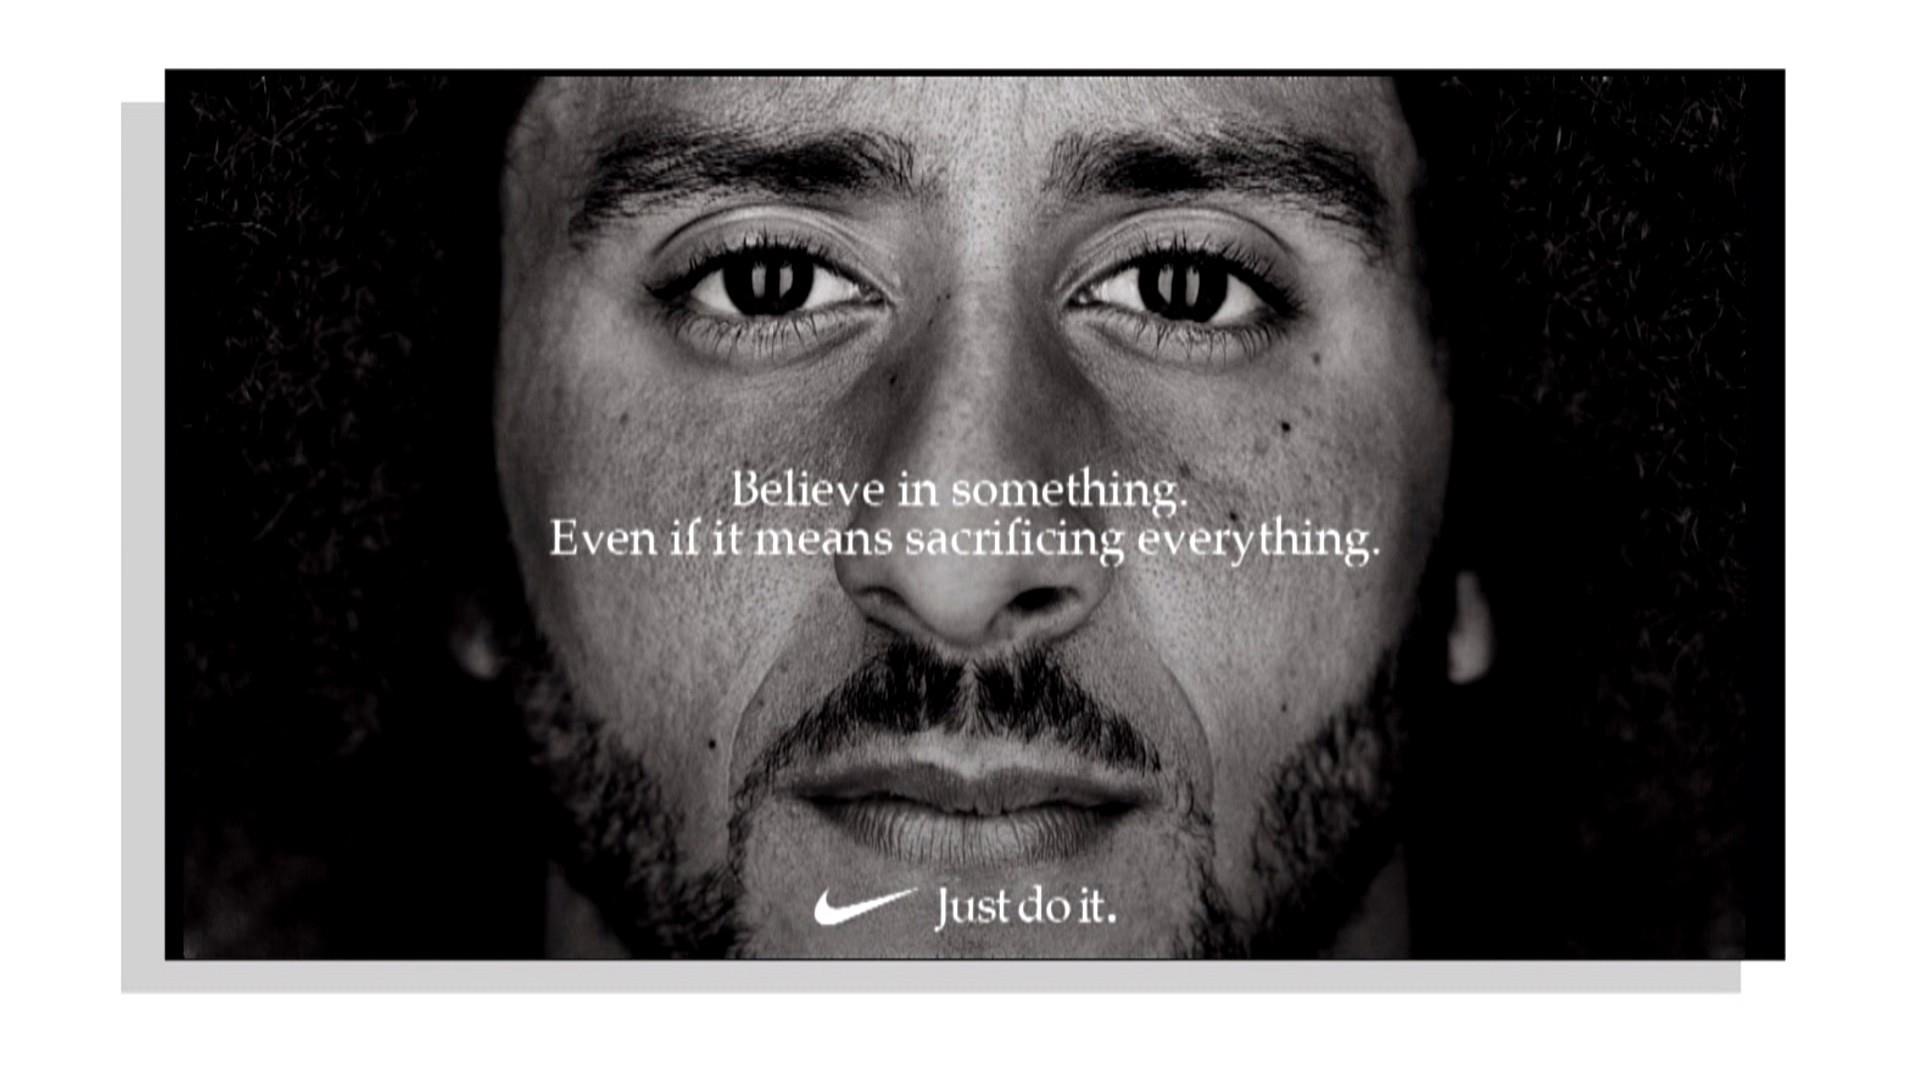 Nike doubles down on defiance of 